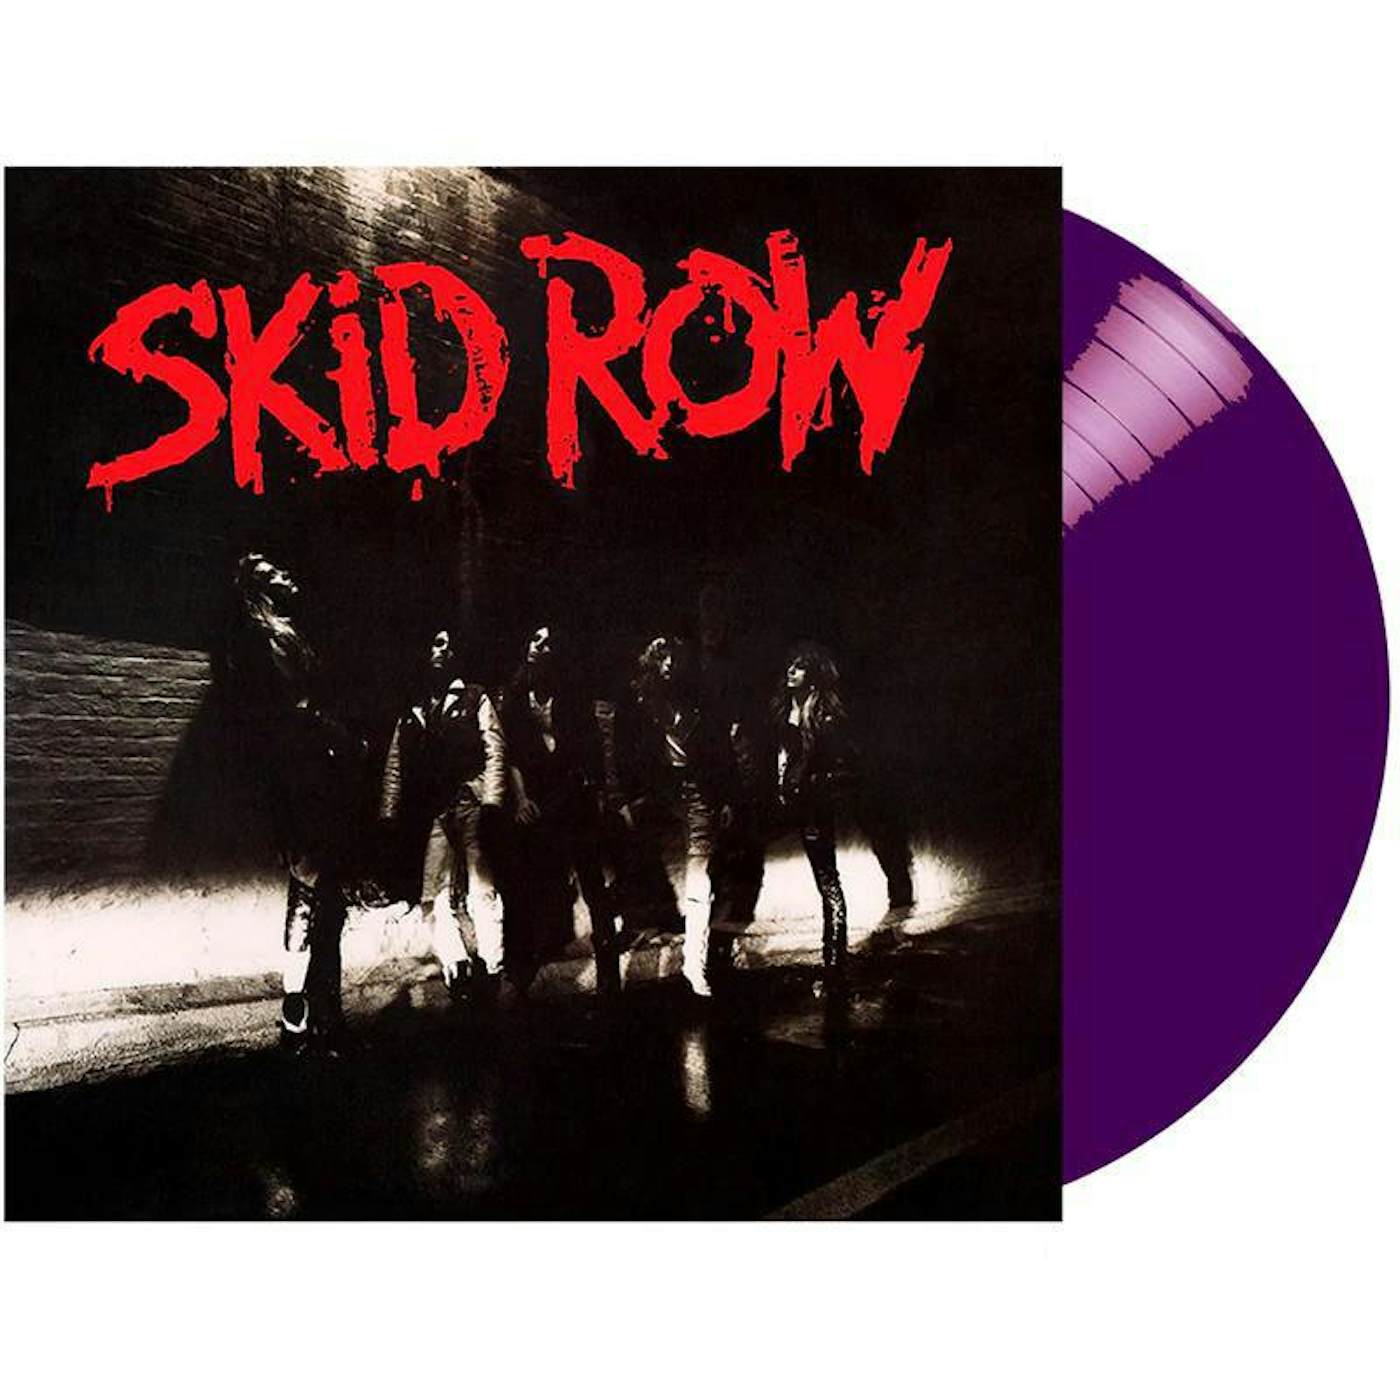 Skid Row S/T (Dark Violet Audiophile Limited Anniversary Edition) Vinyl Record